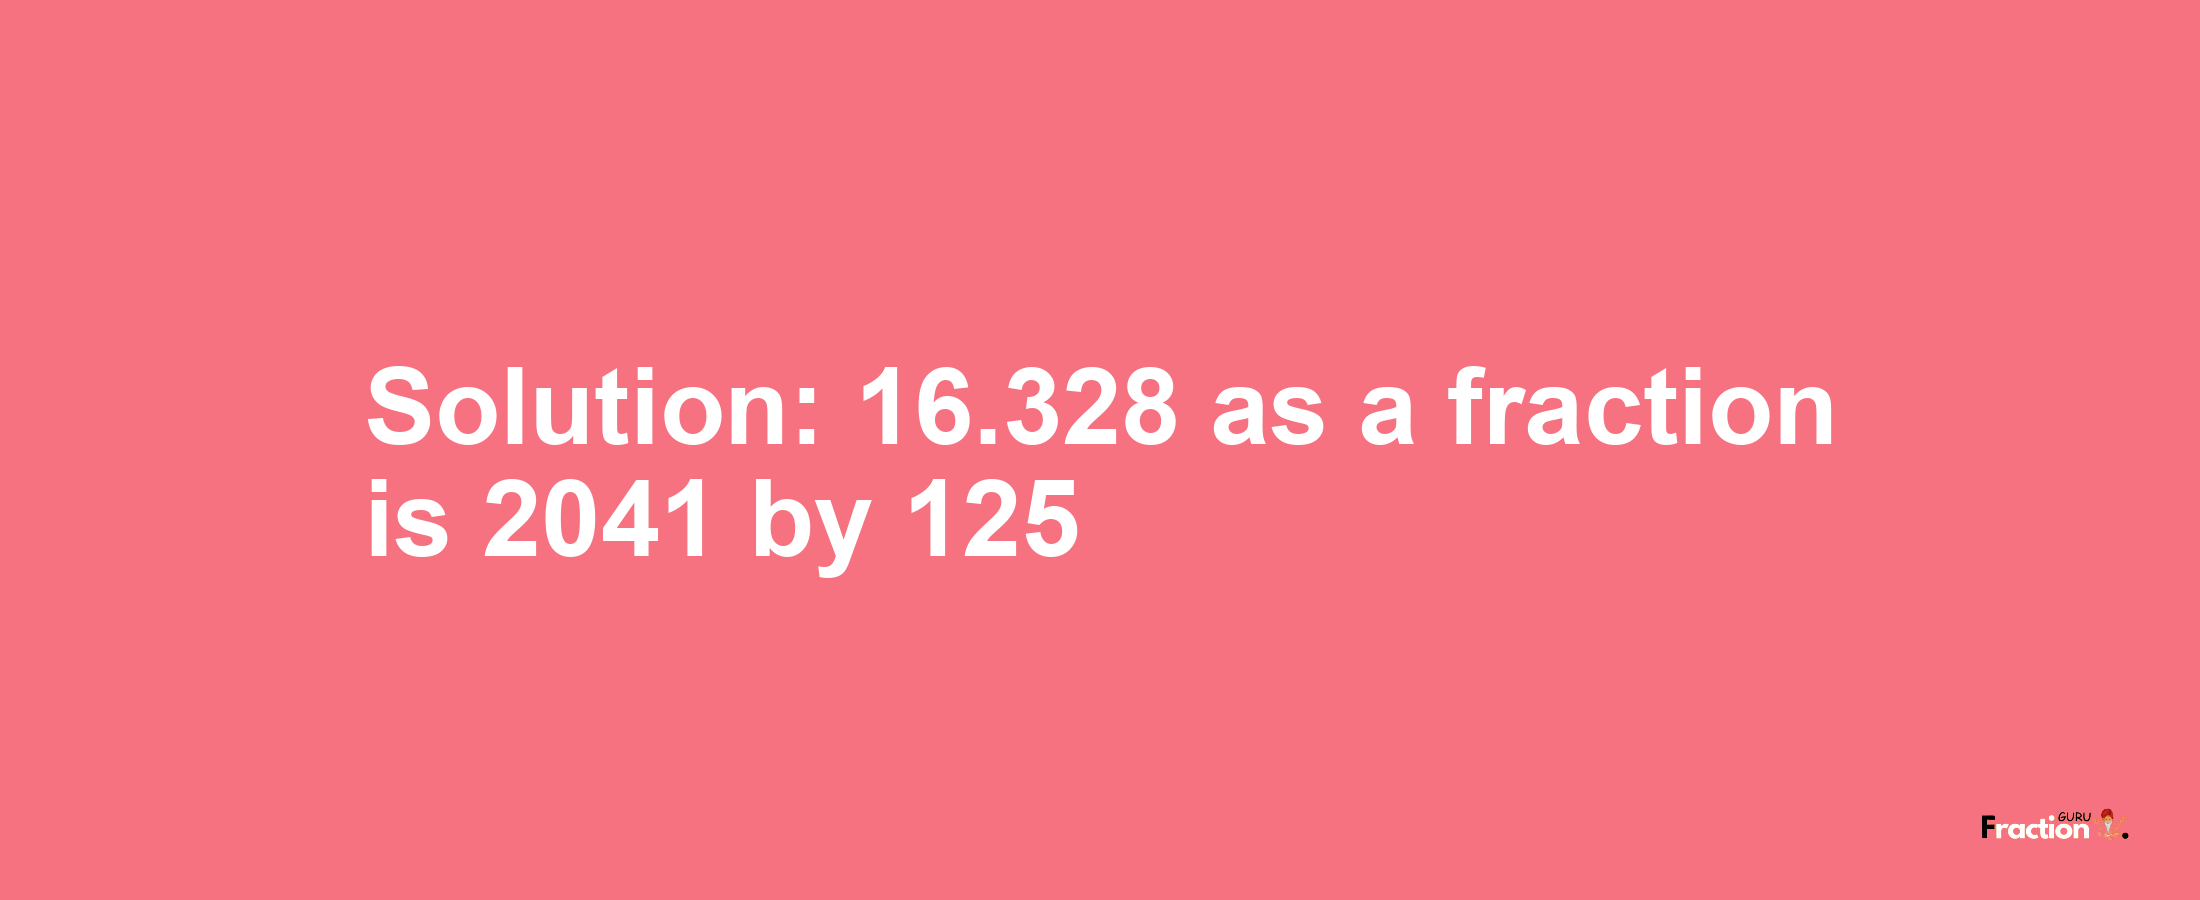 Solution:16.328 as a fraction is 2041/125